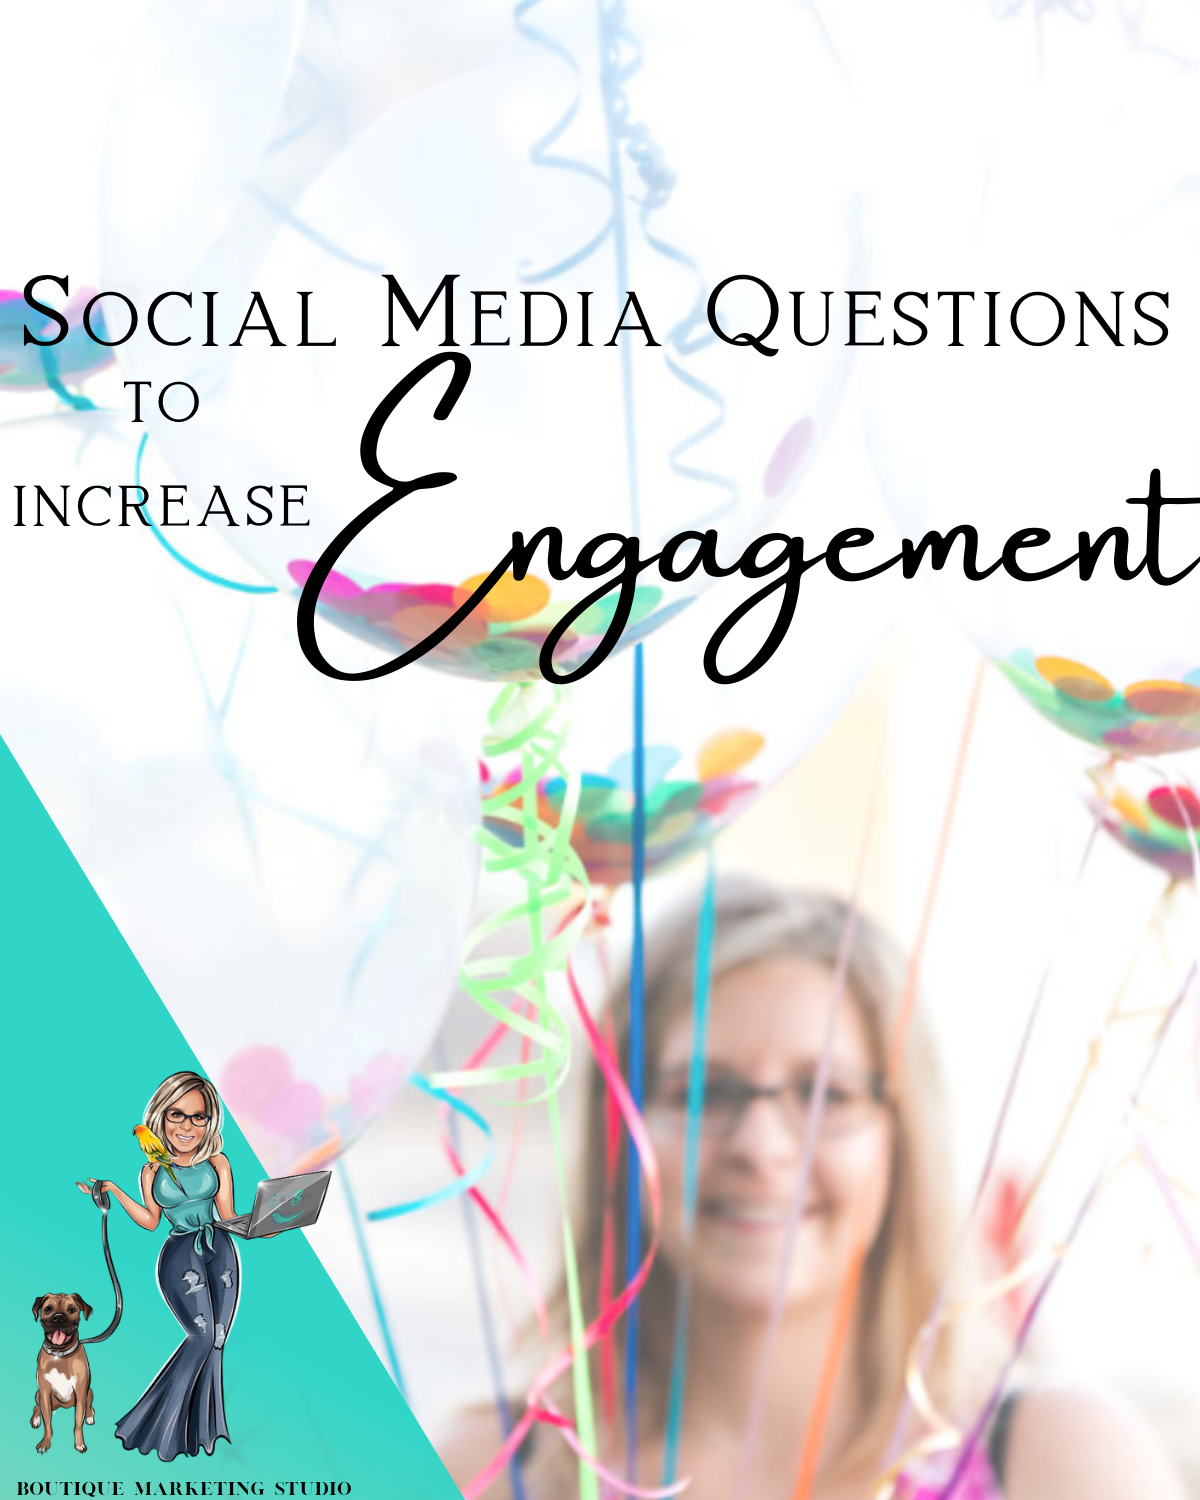 65 Social Media questions to increase engagement